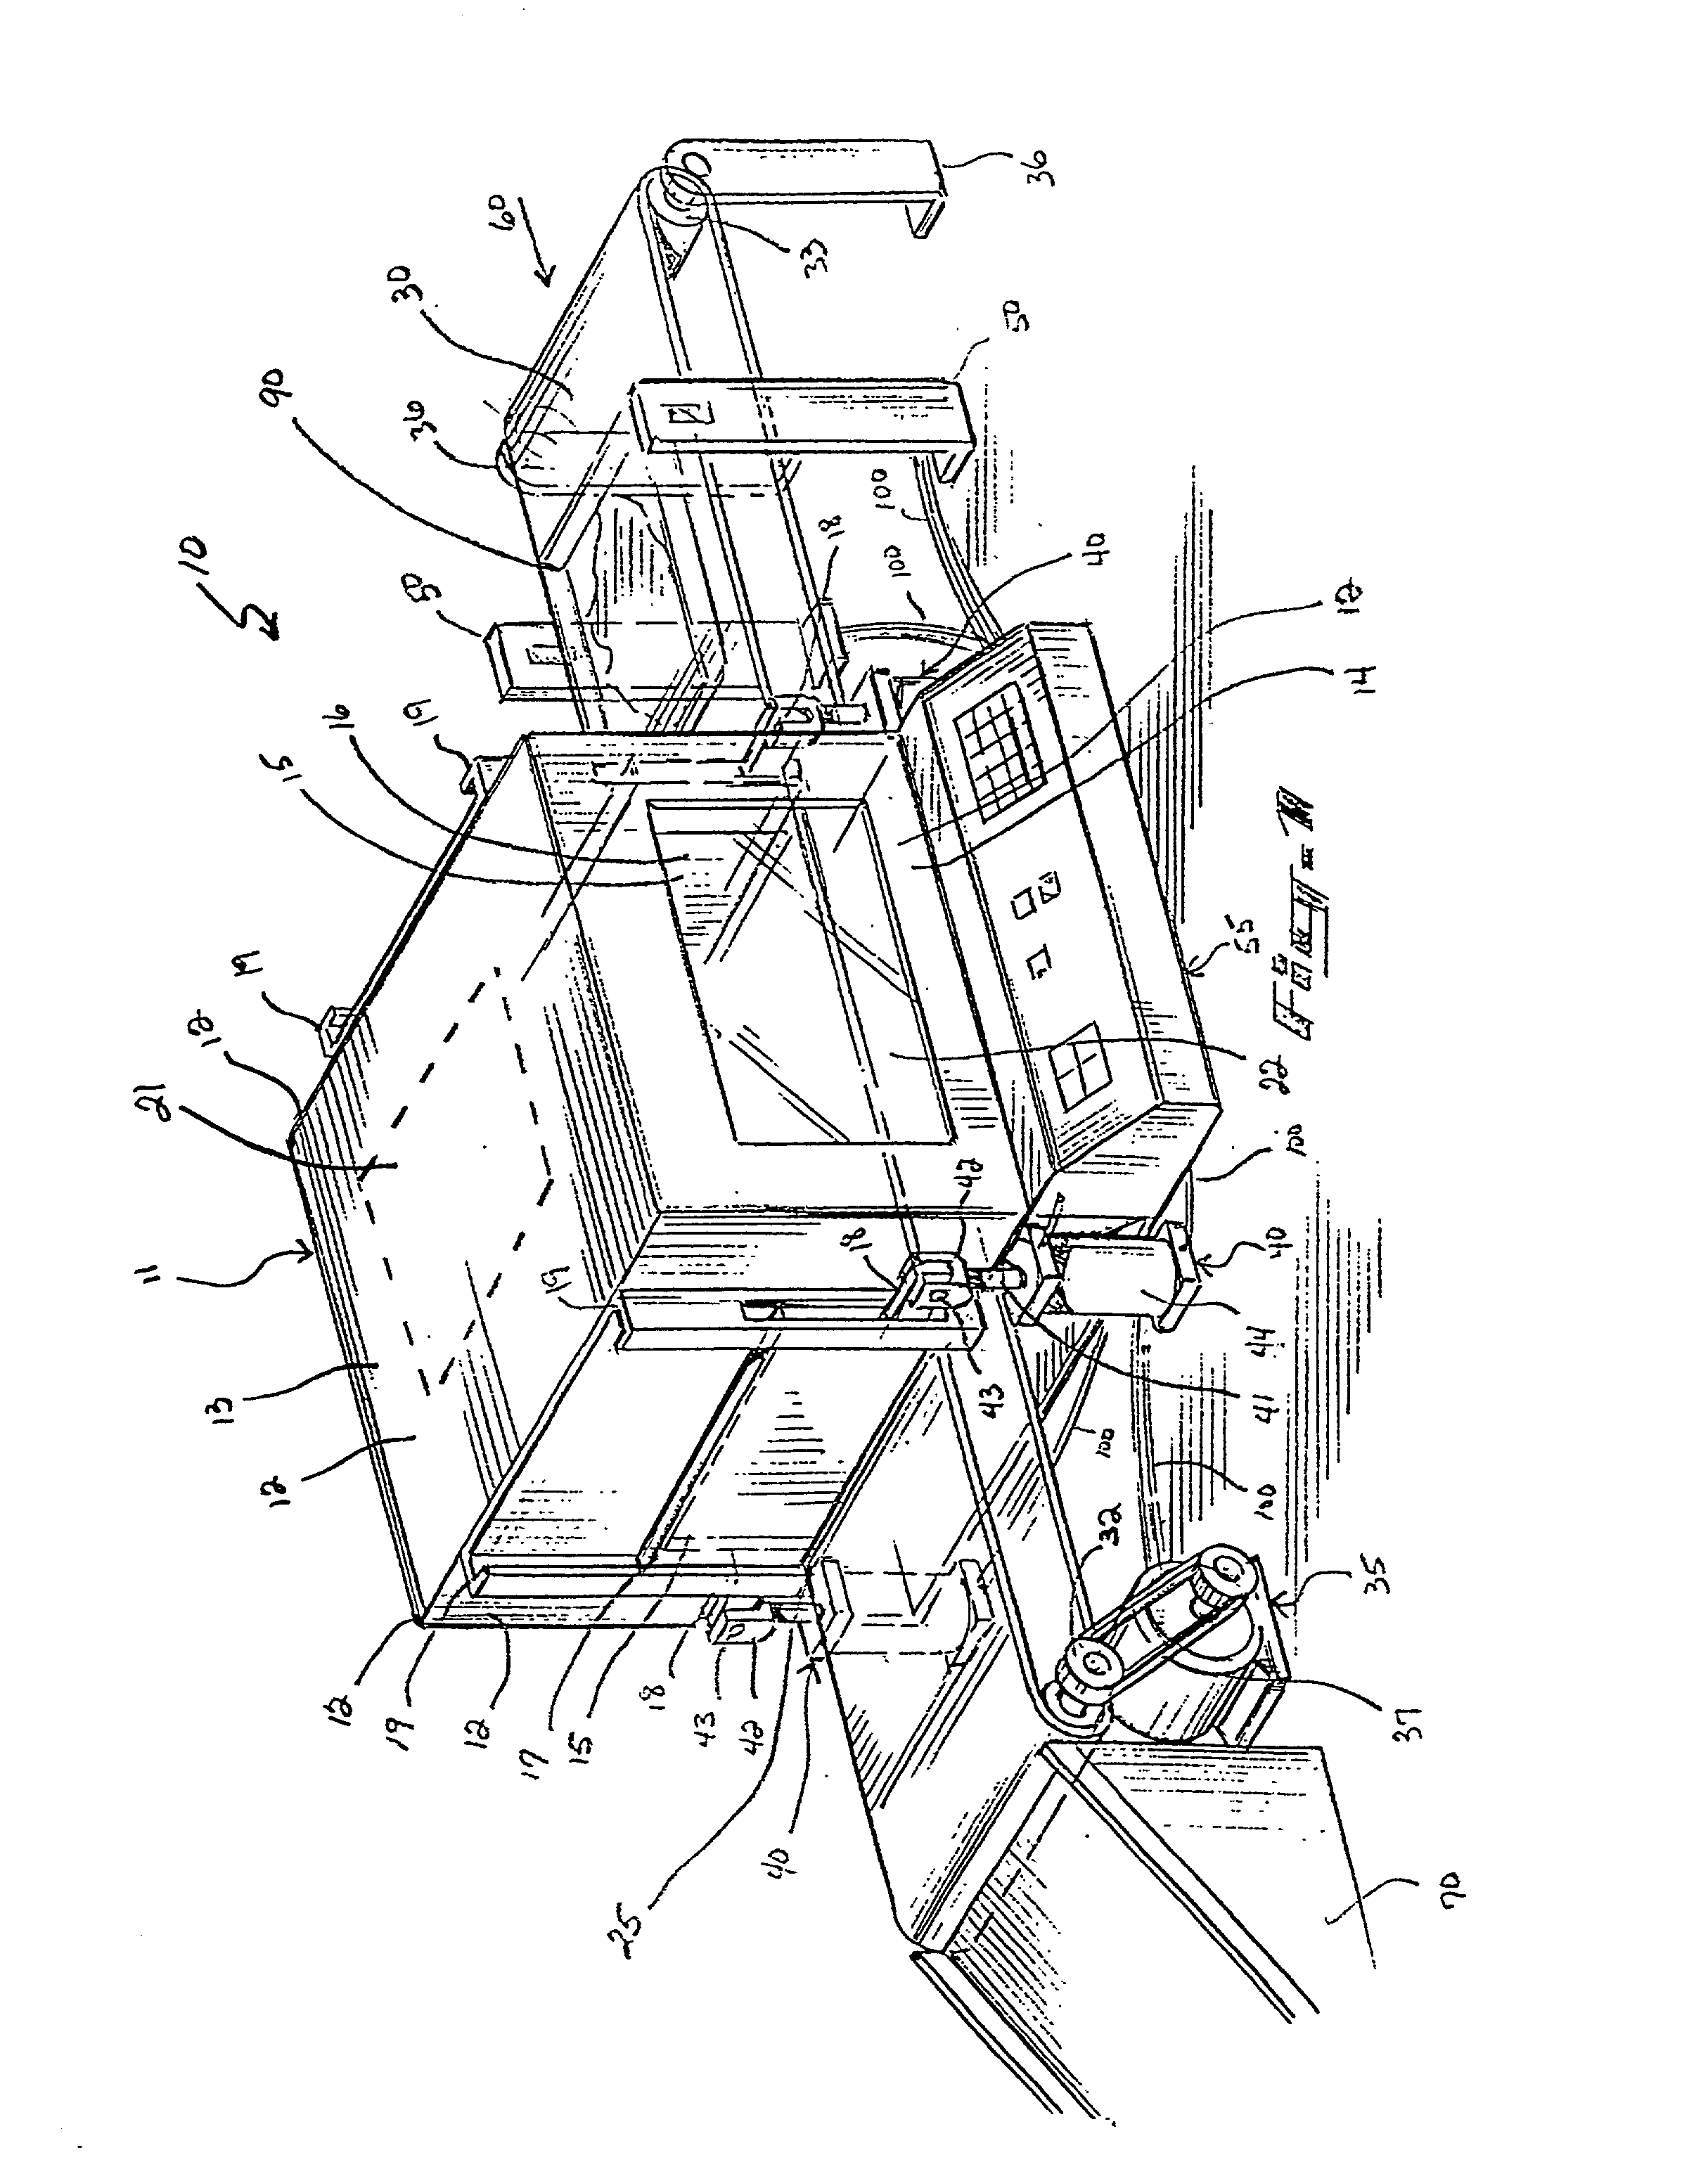 Conveyorized oven with automated door